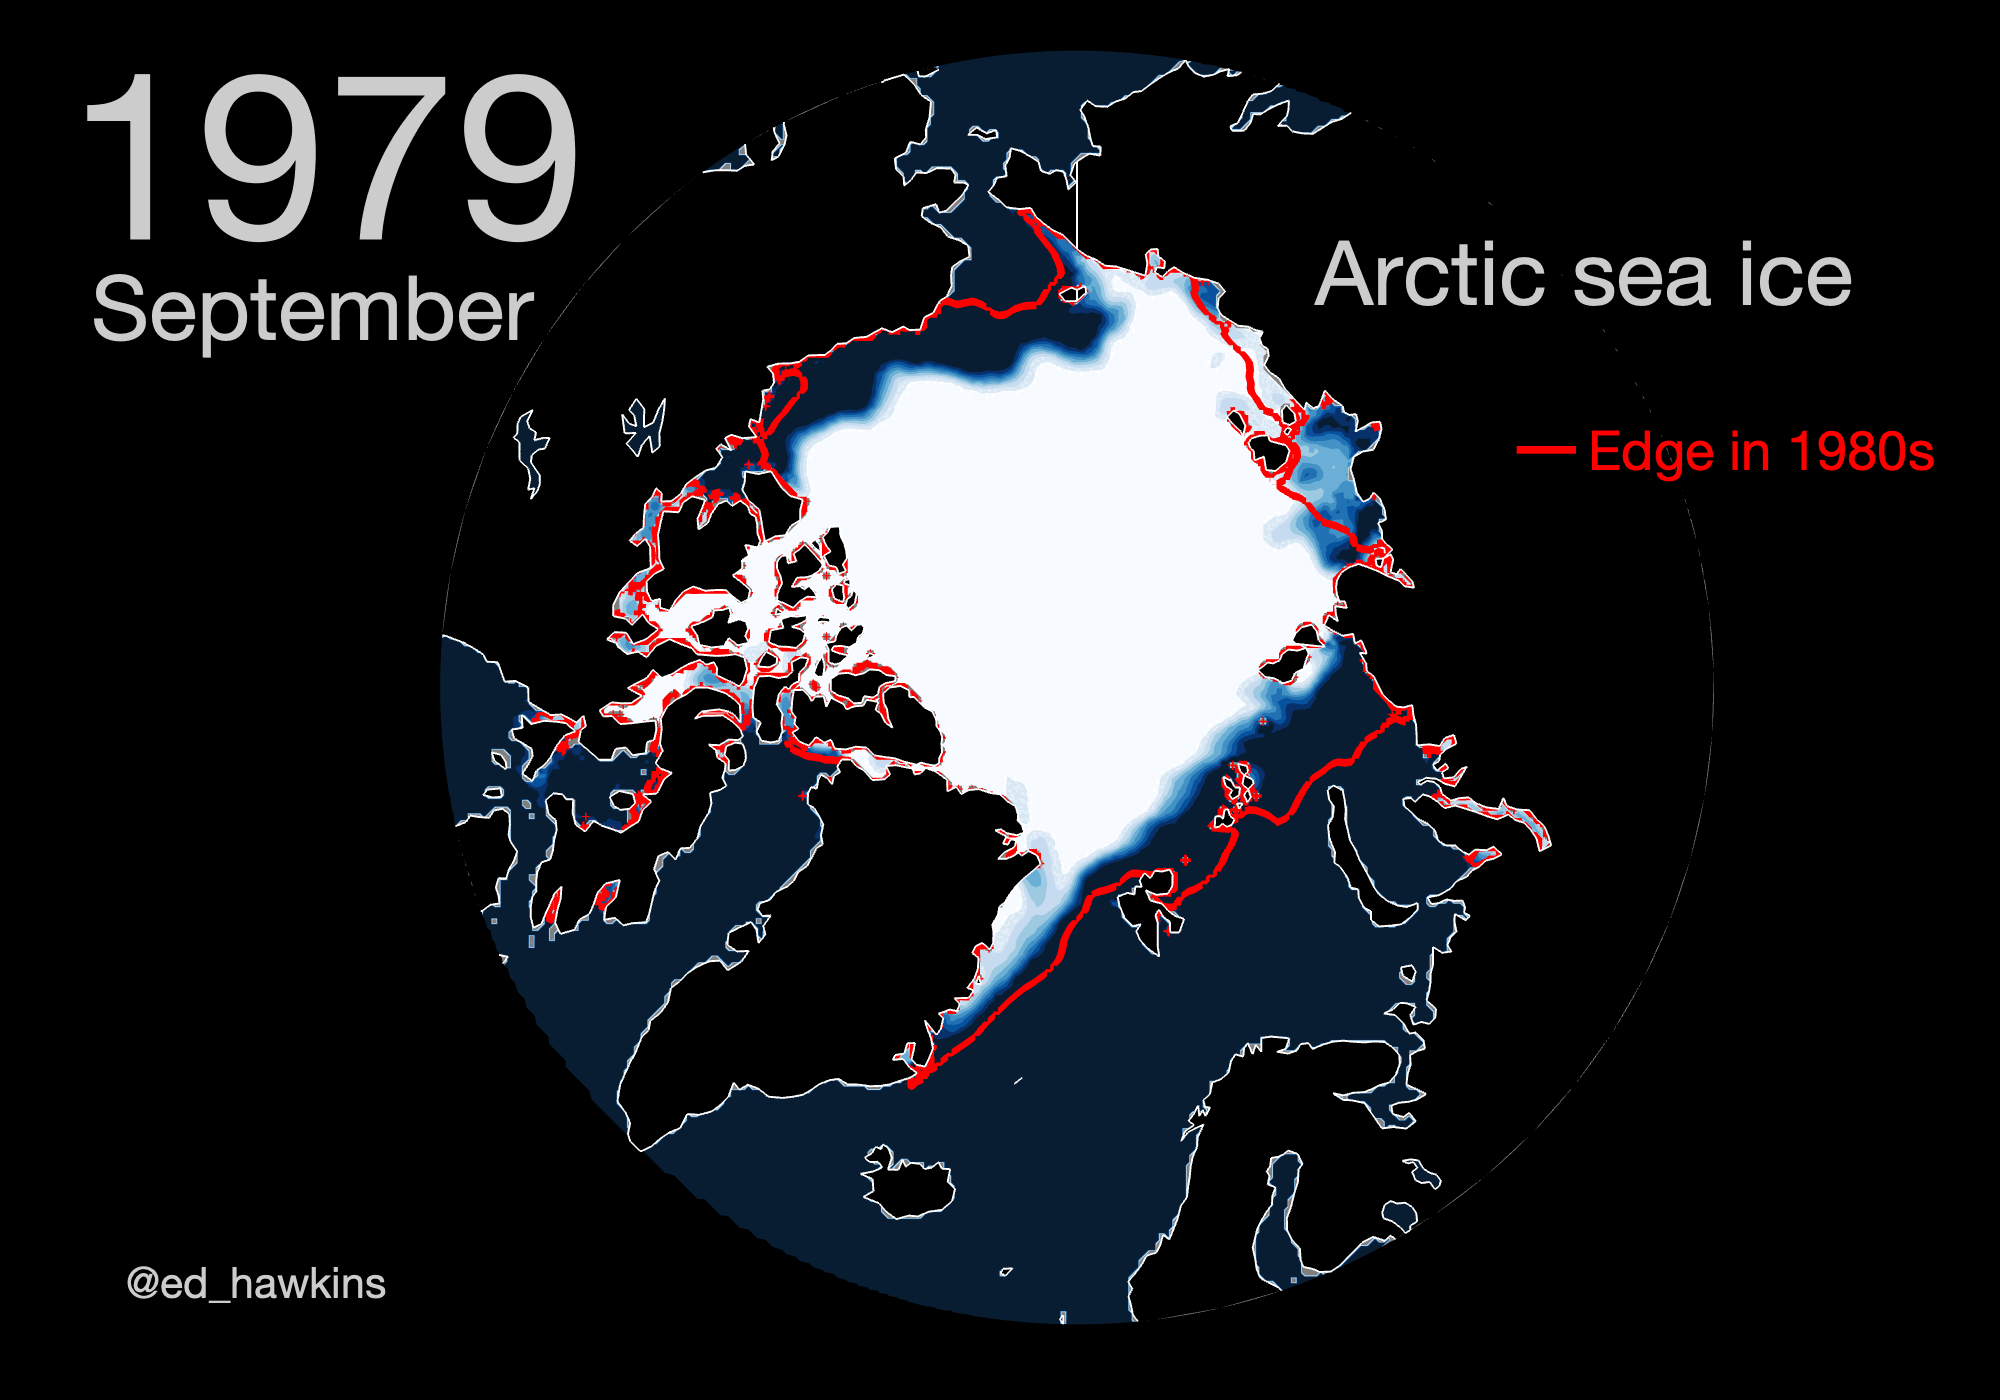 An animated map that shows the changing area of sea ice in the Arctic from the late 1970s to present day.